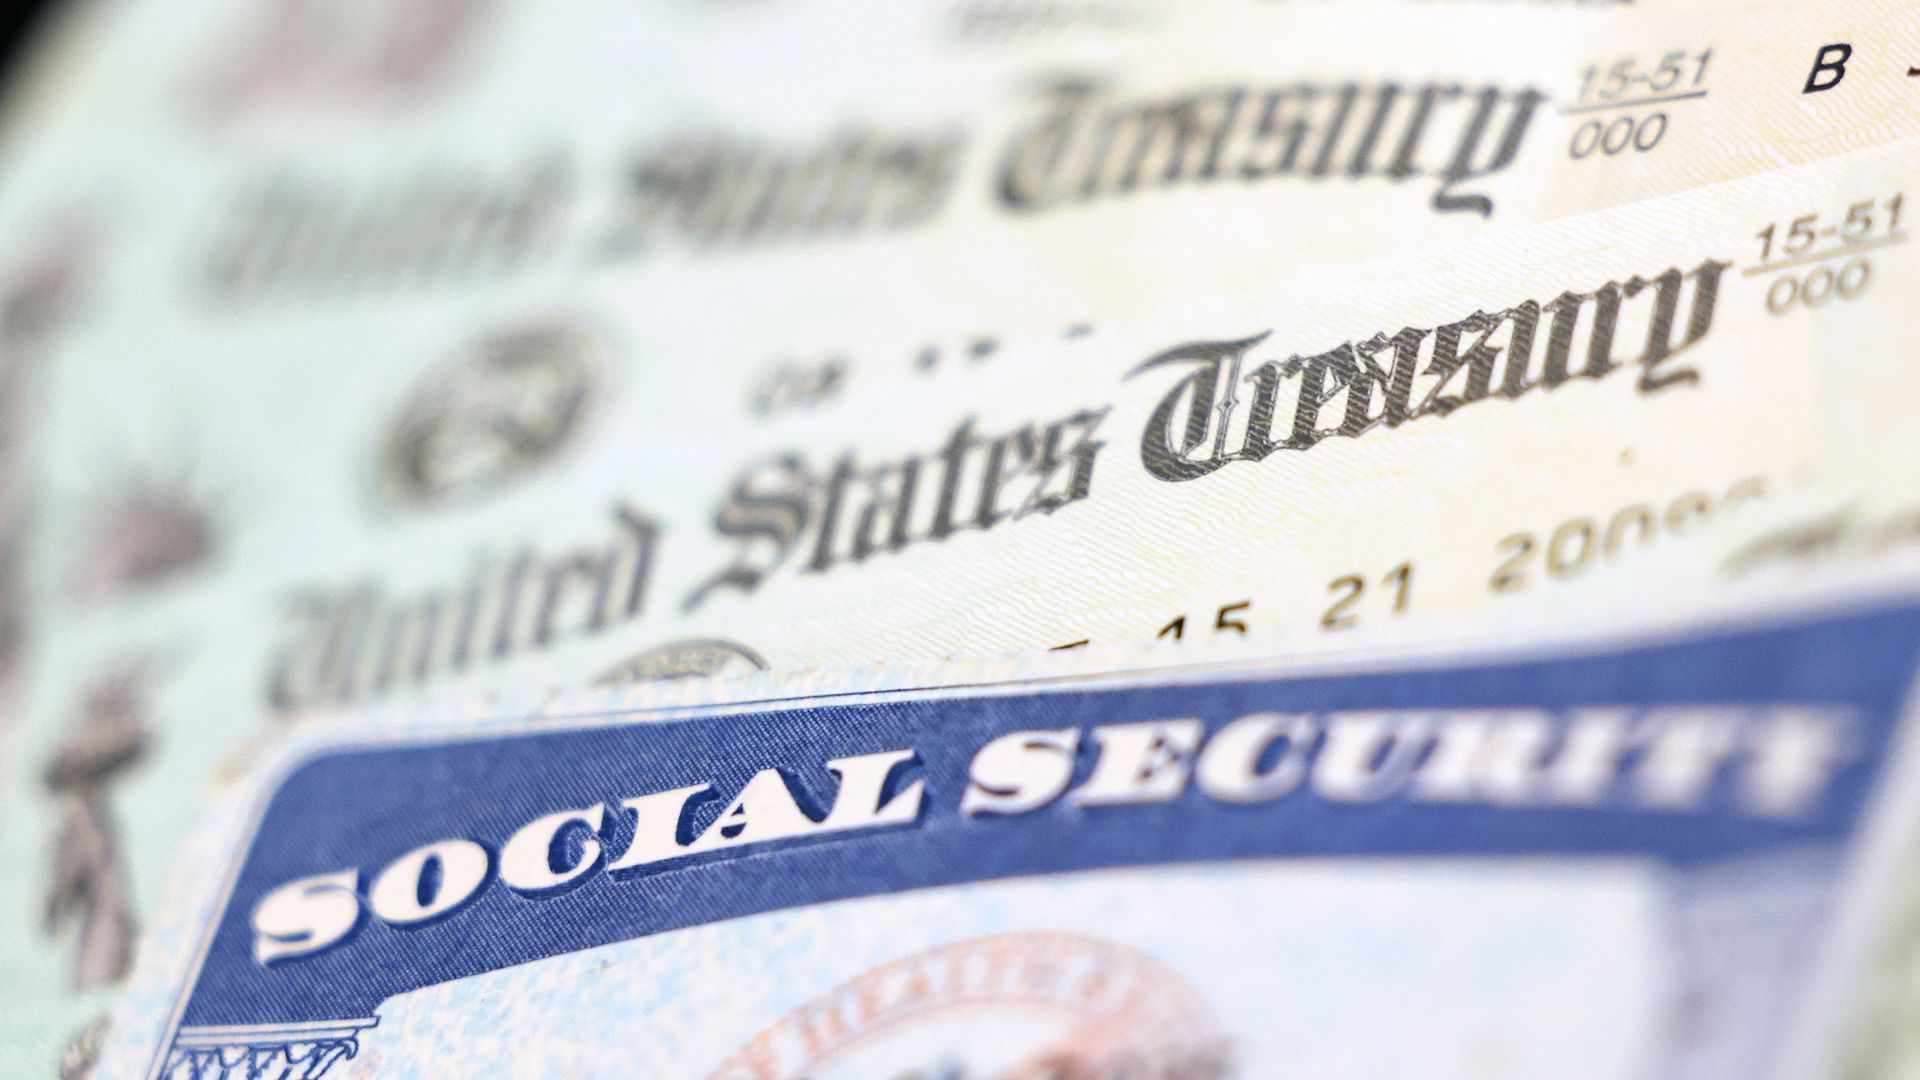 Social Security card on stack of Treasury checks